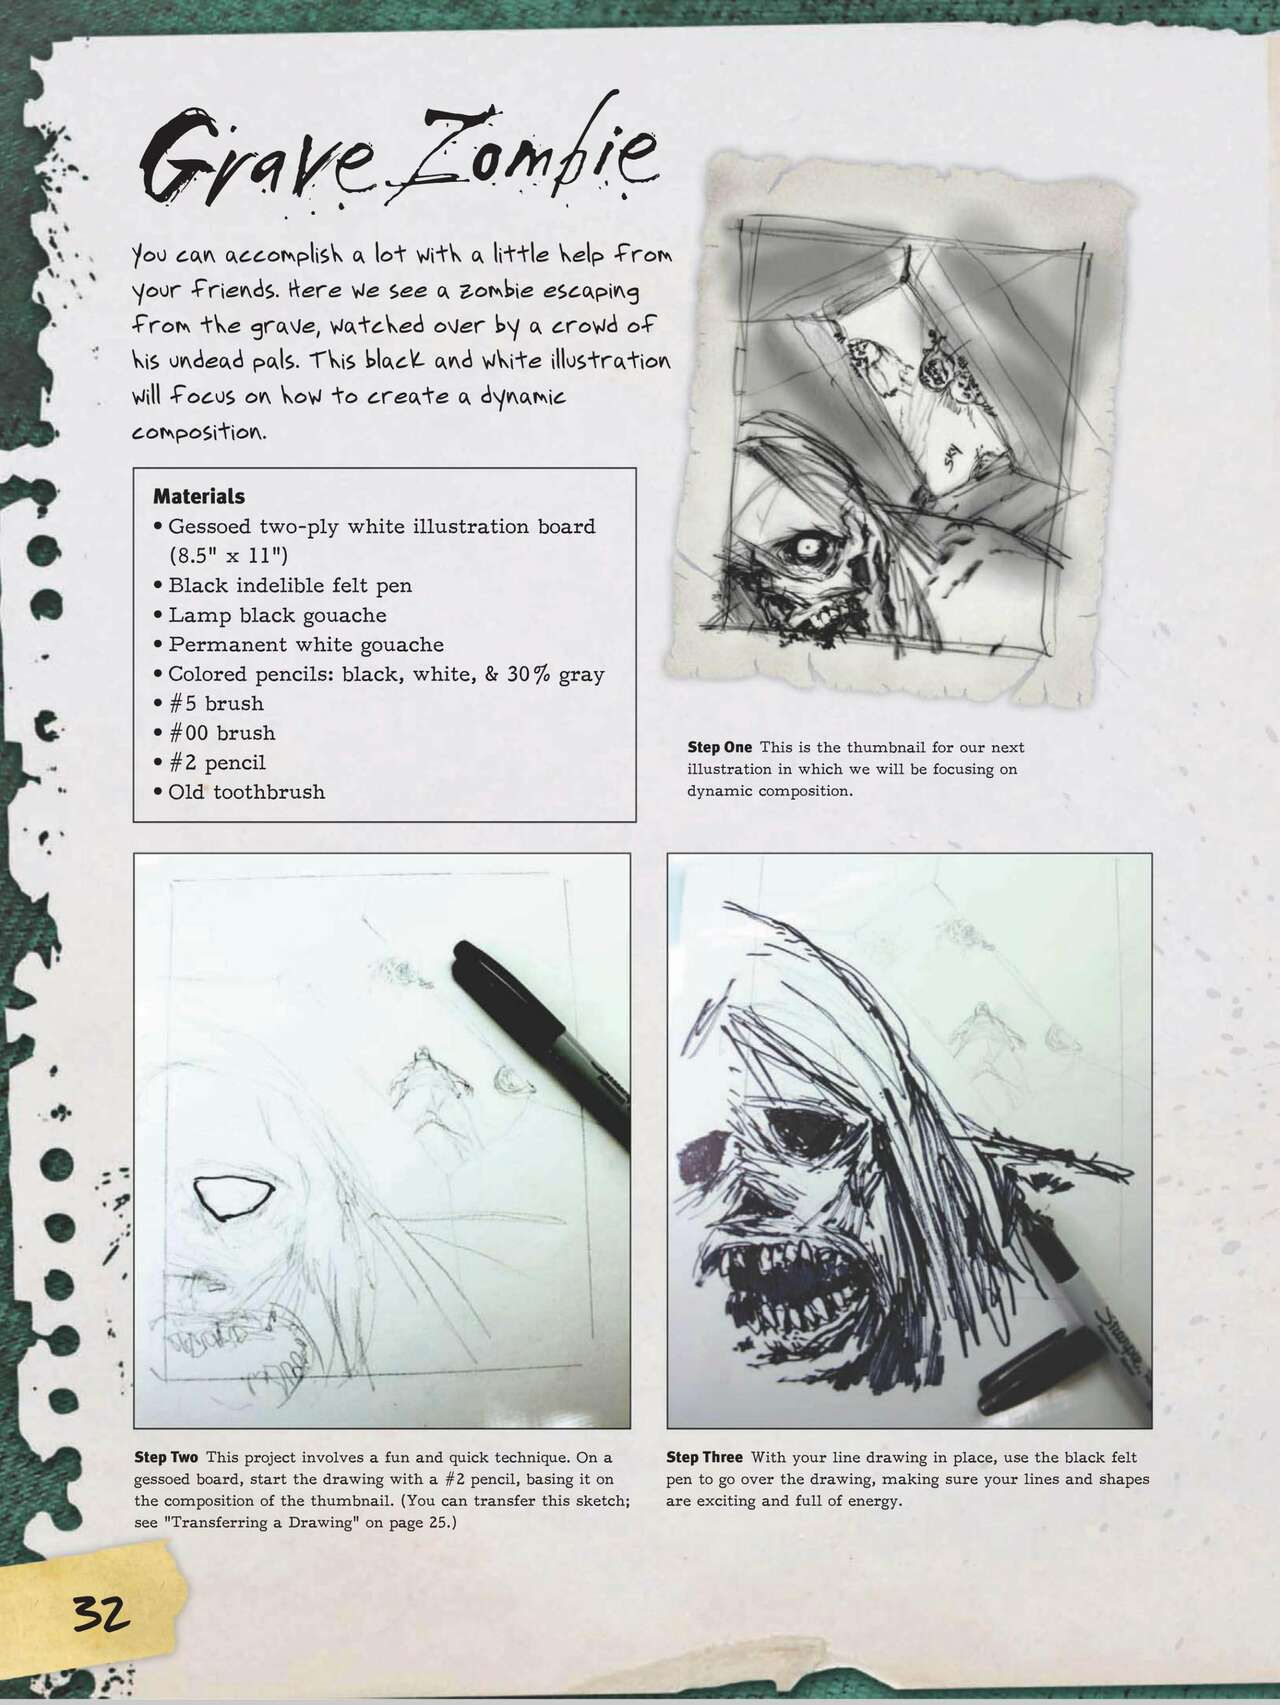 How to Draw Zombies: Discover the secrets to drawing, painting, and illustrating the undead 僵尸描绘集 33